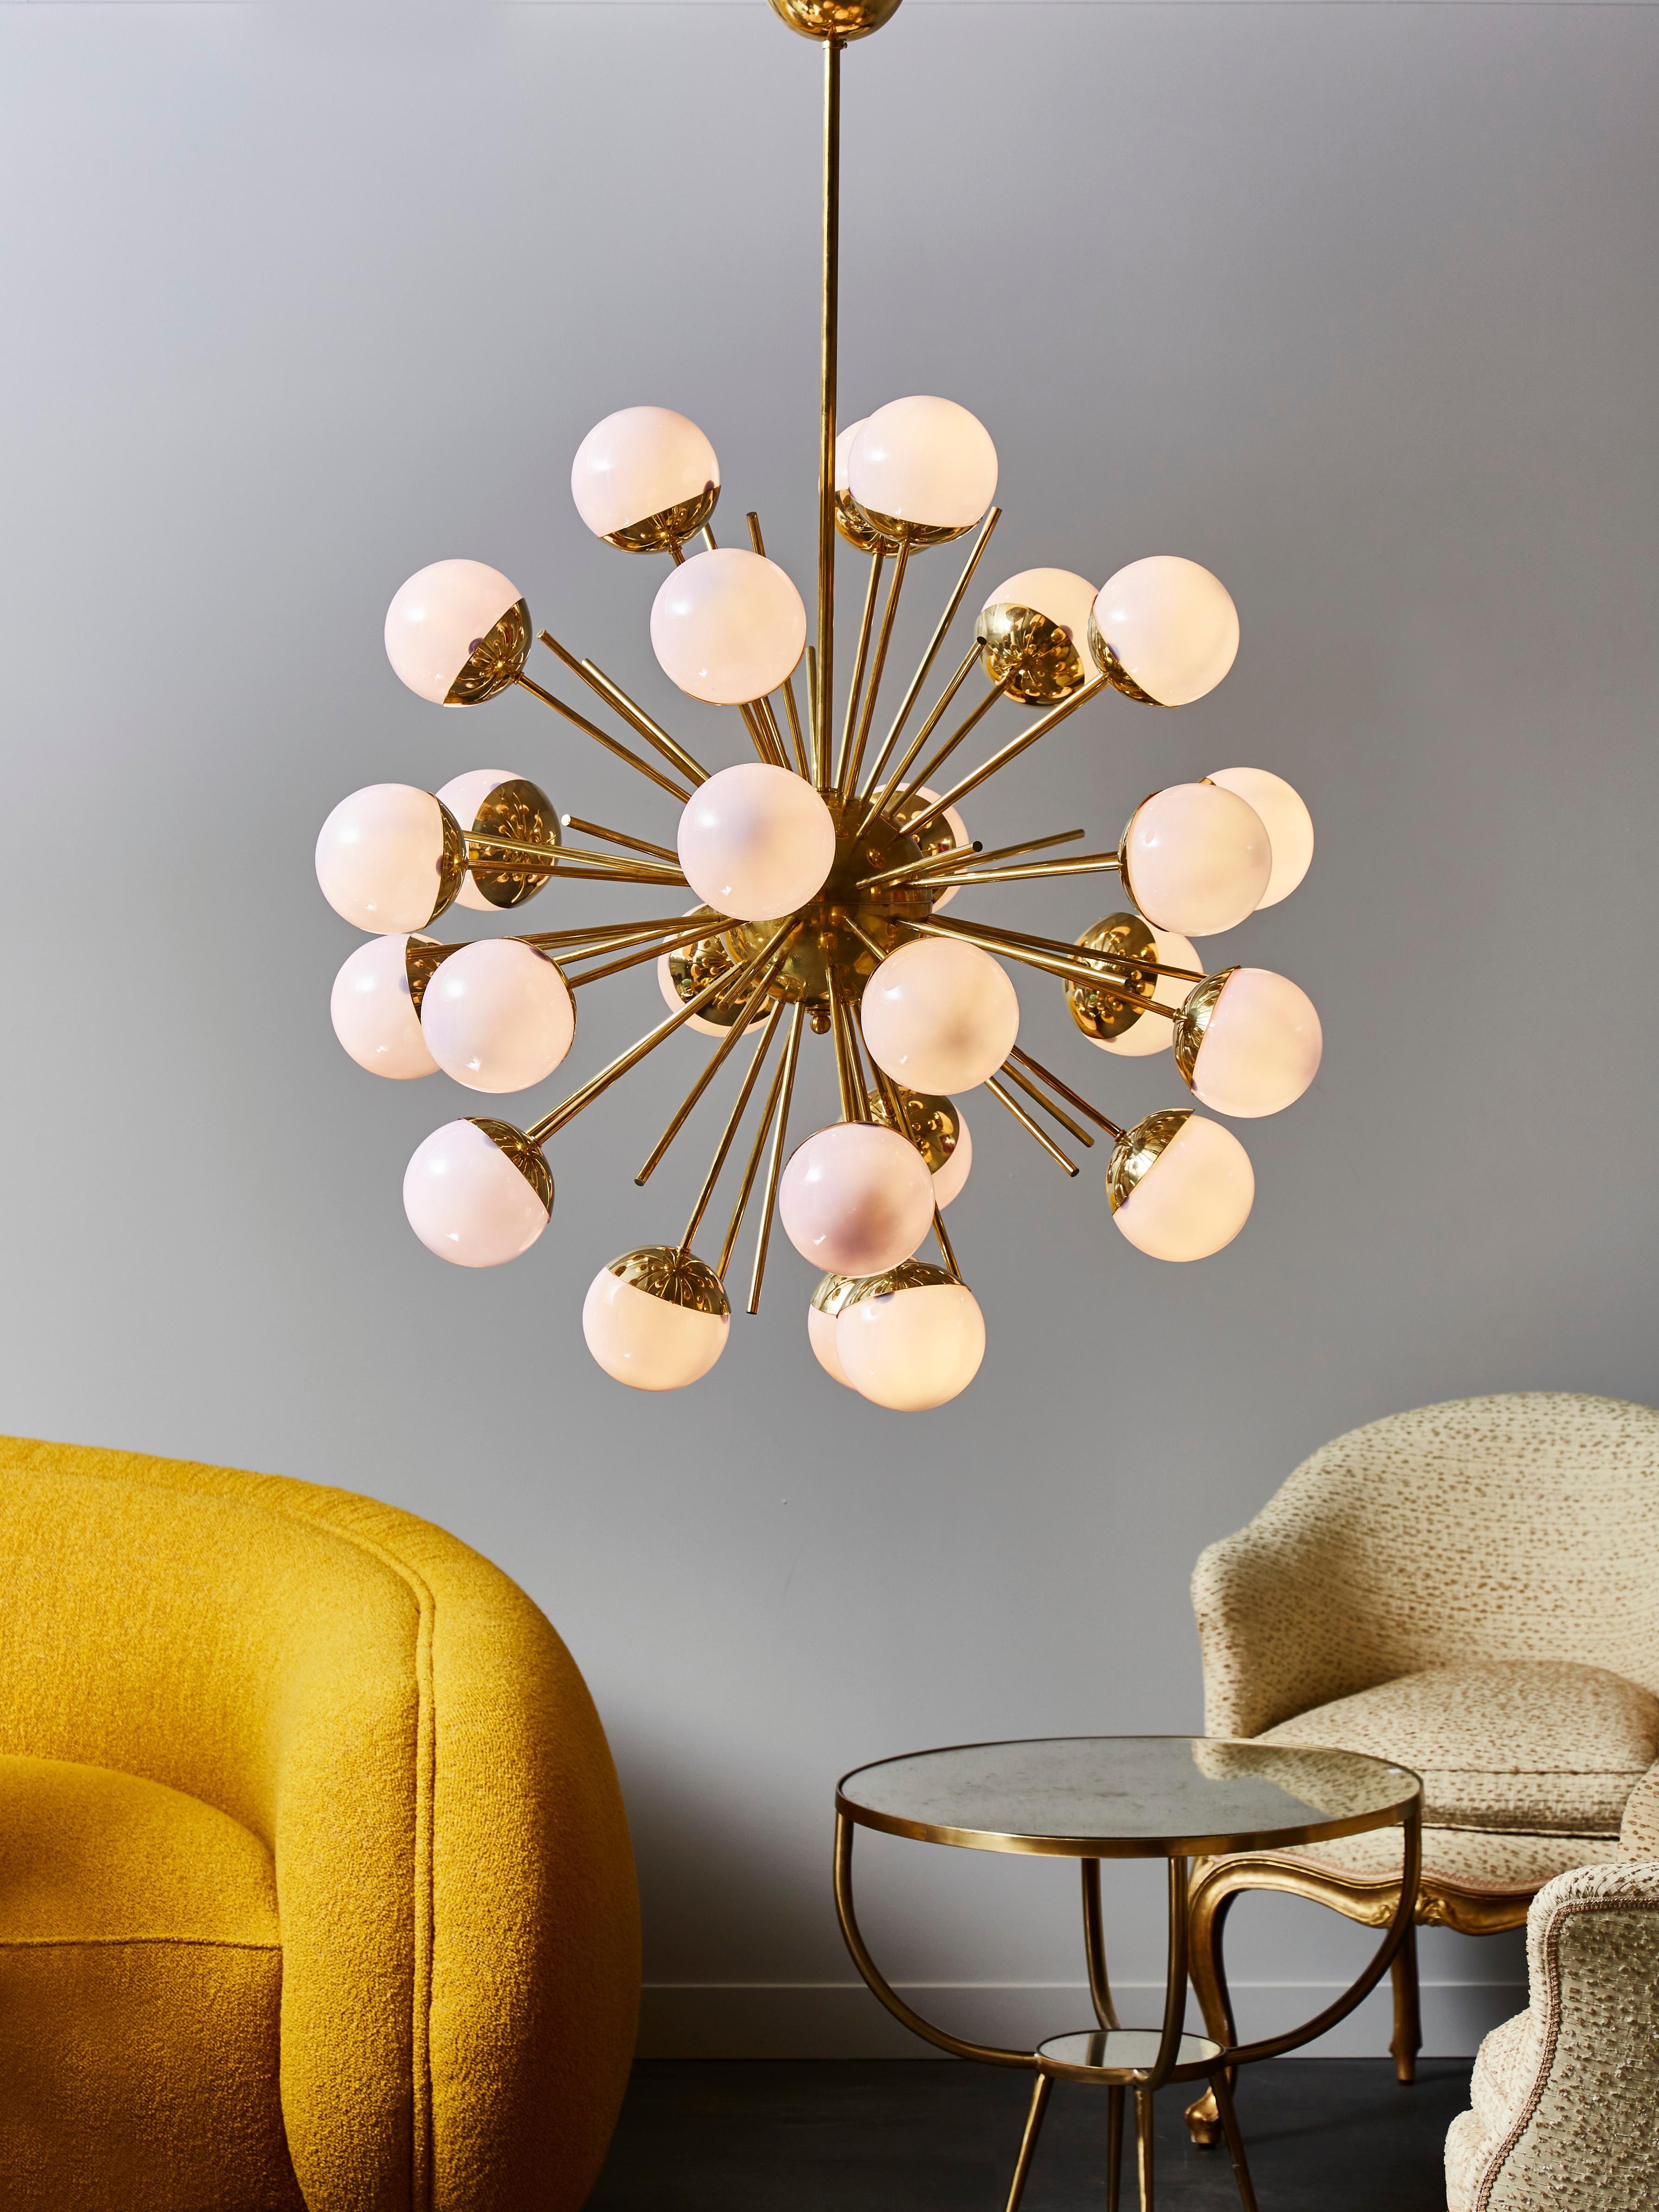 Sputnik style chandelier made of a brass structure and twenty six arms of light.

Each of them is ornated with a light purple tinted glass globe hiding the light bulb.

When lighted on, the globes keep a very light shade of purple.